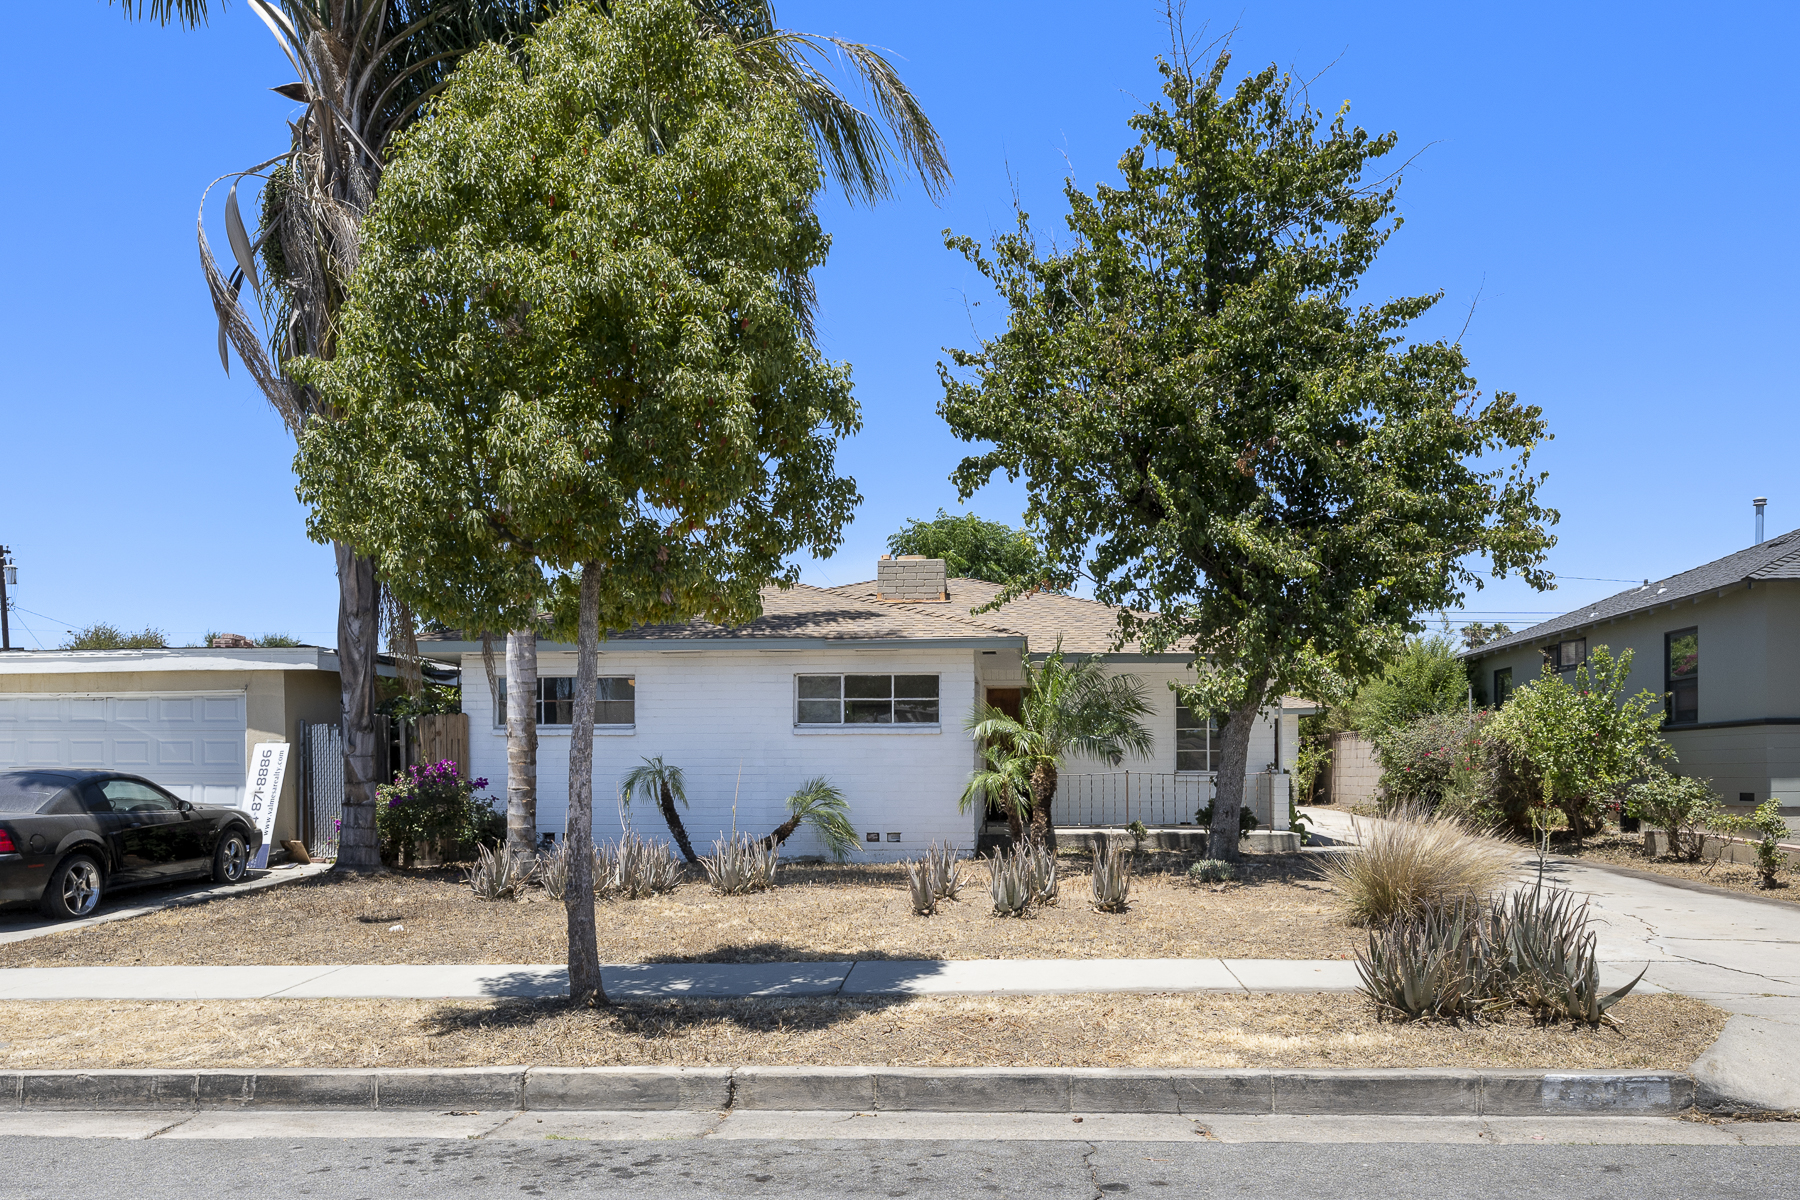 319 E. Francis Ave, La Habra, CA 90631: Exterior straight on shot full front, street view.